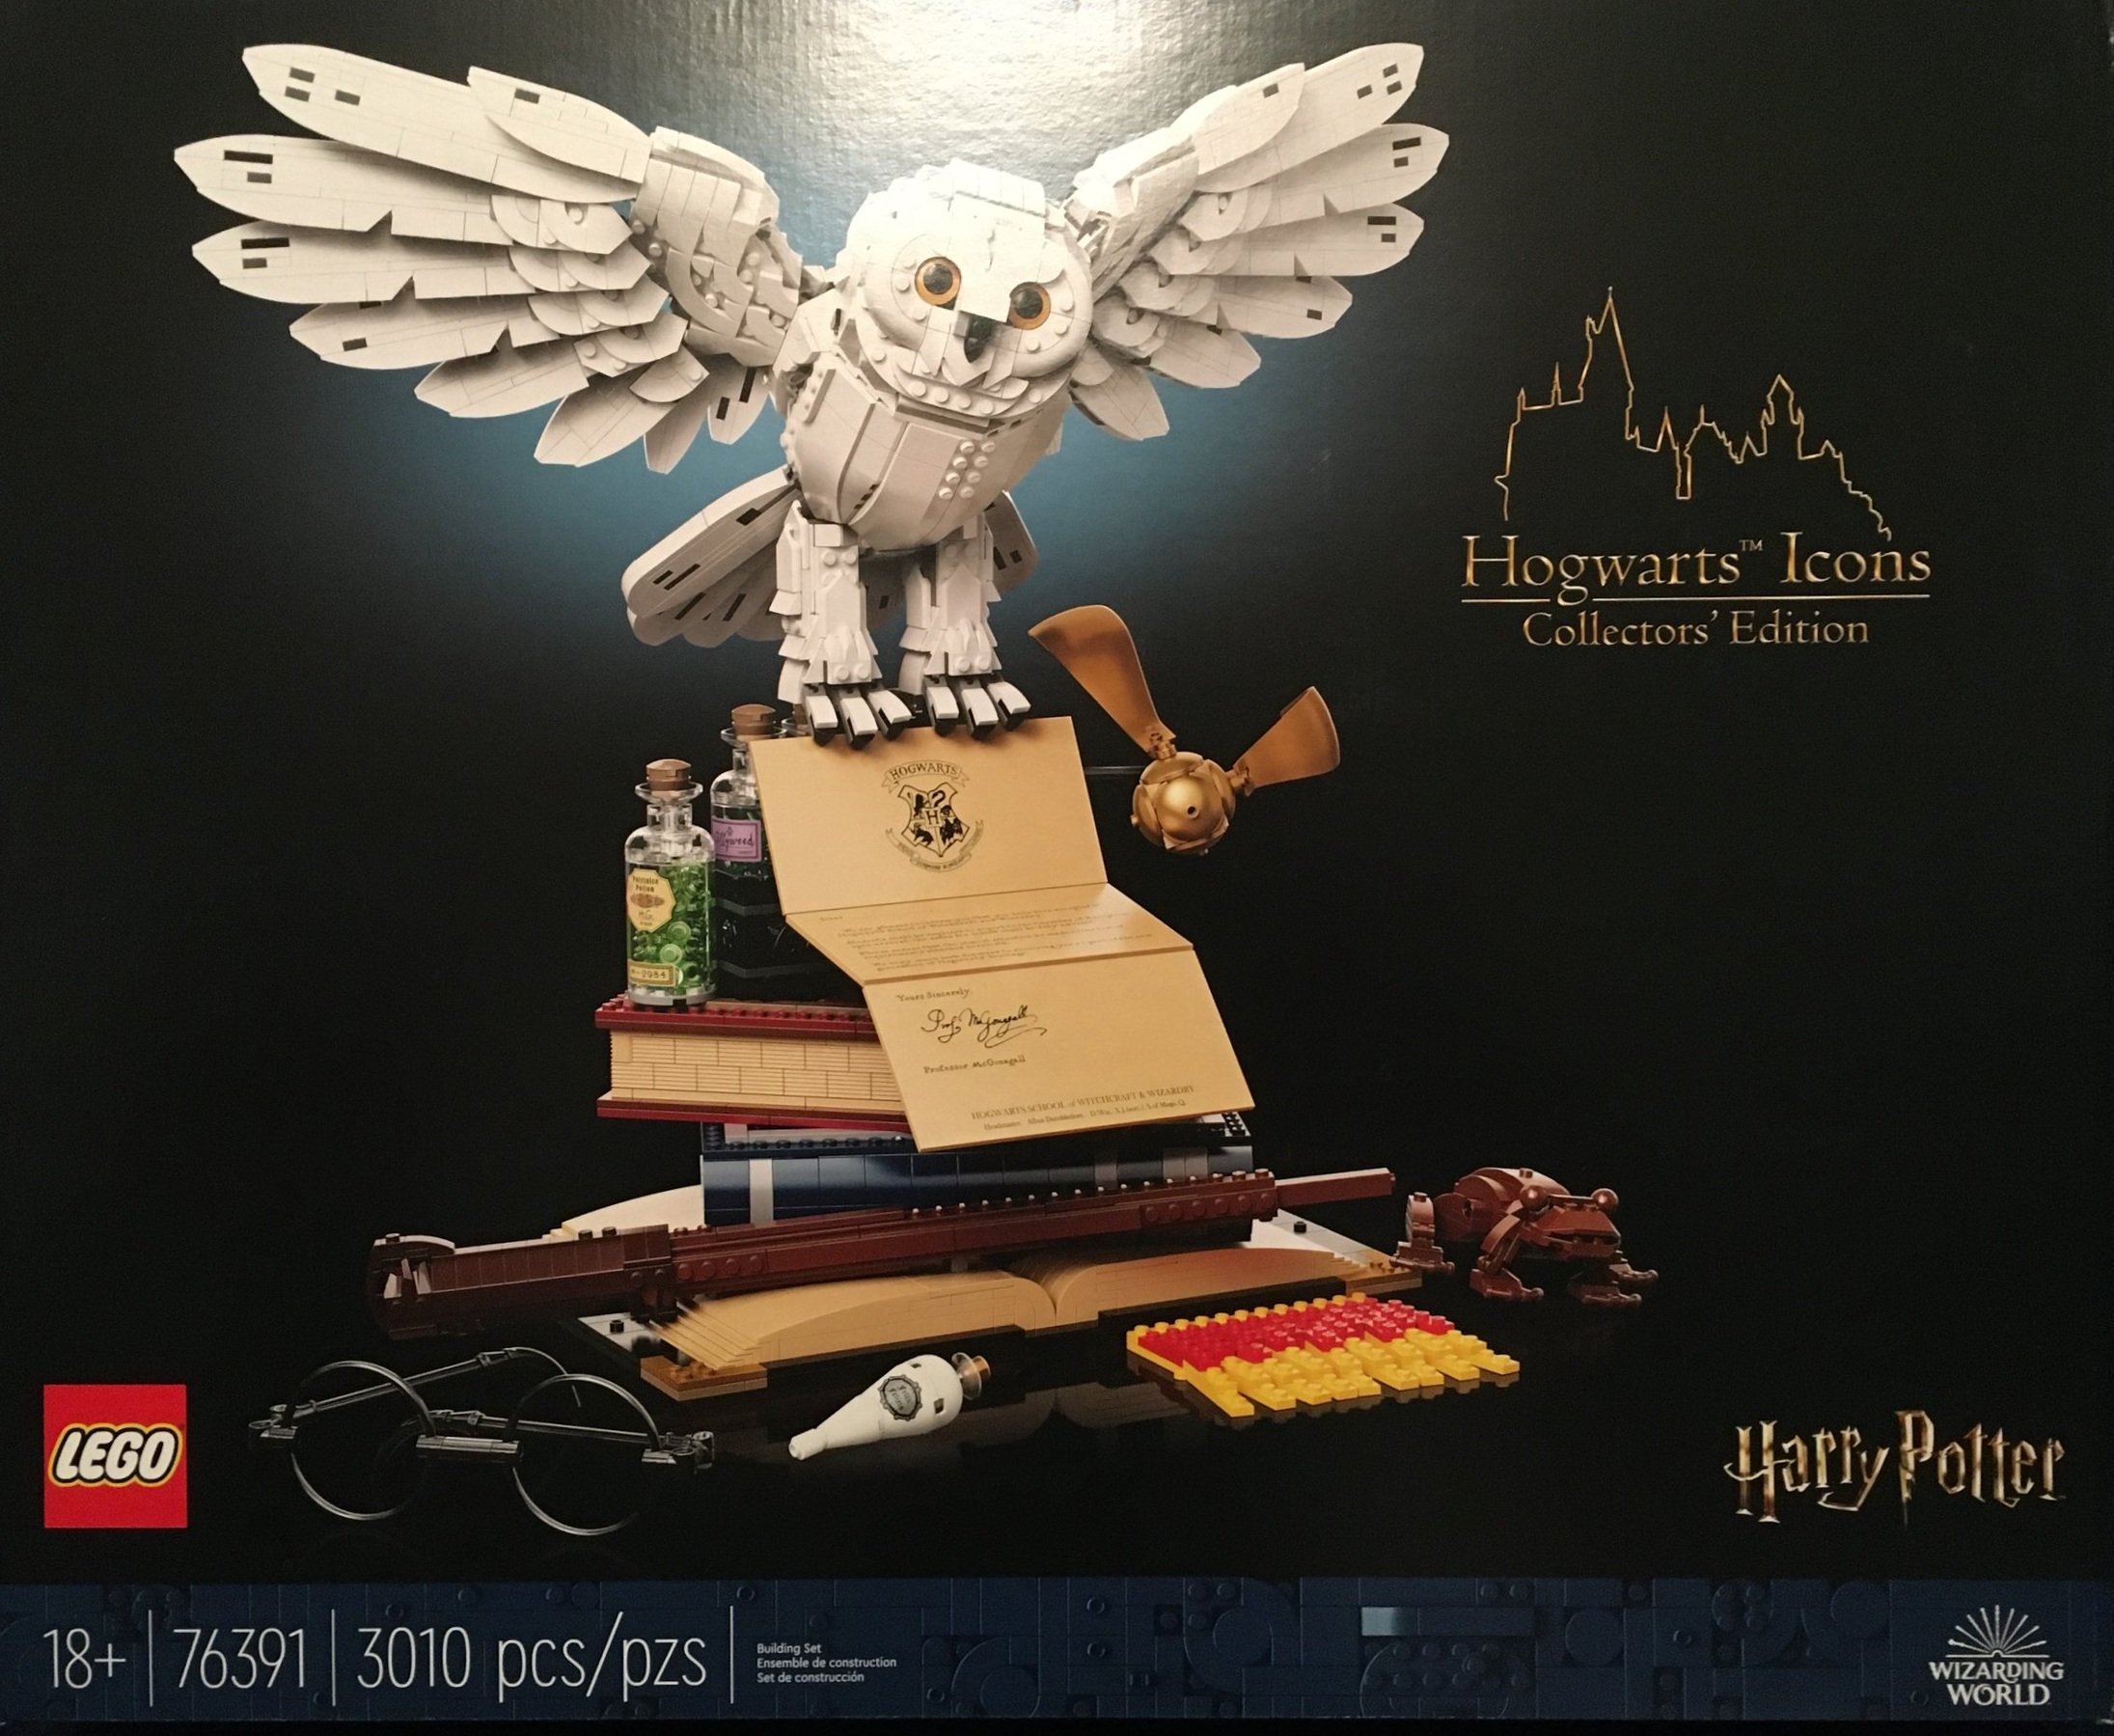 LEGO 76391 Harry Potter Hogwarts Icons Collector's Edition